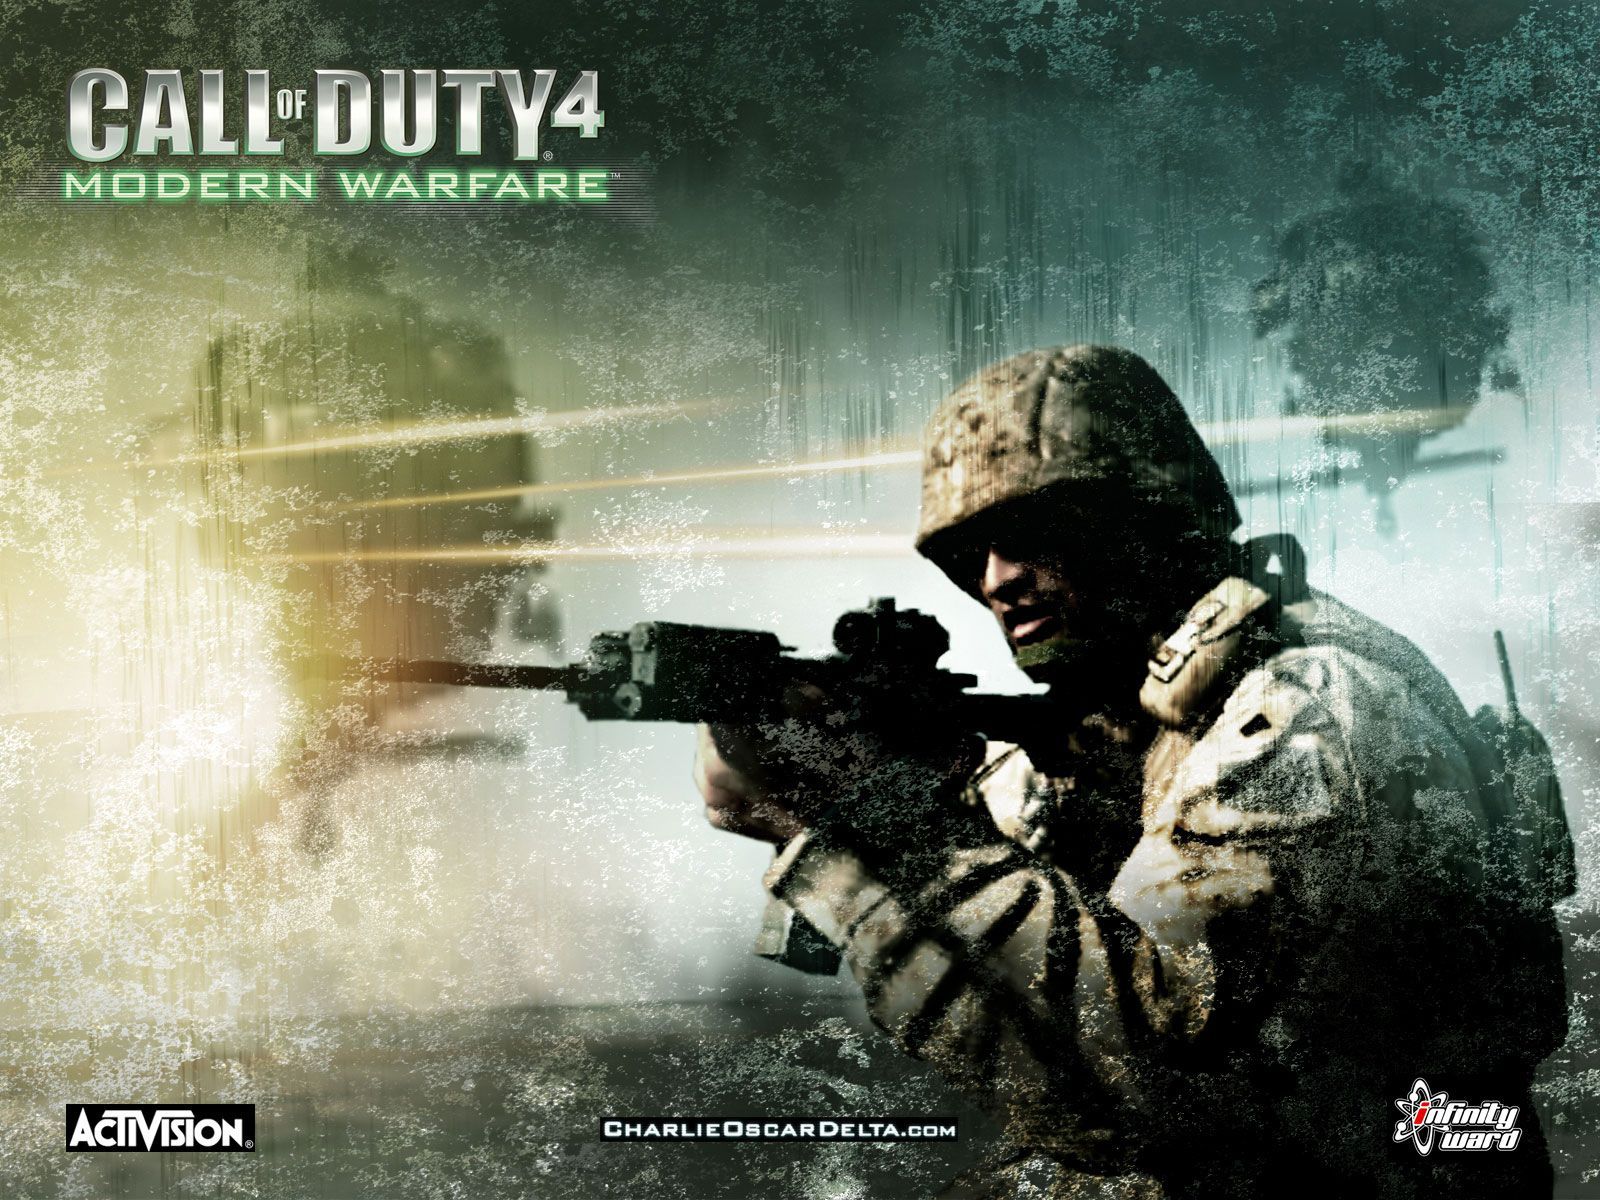 Call of duty 4 desktop wallpapers Call of Duty 4 Wallpapers